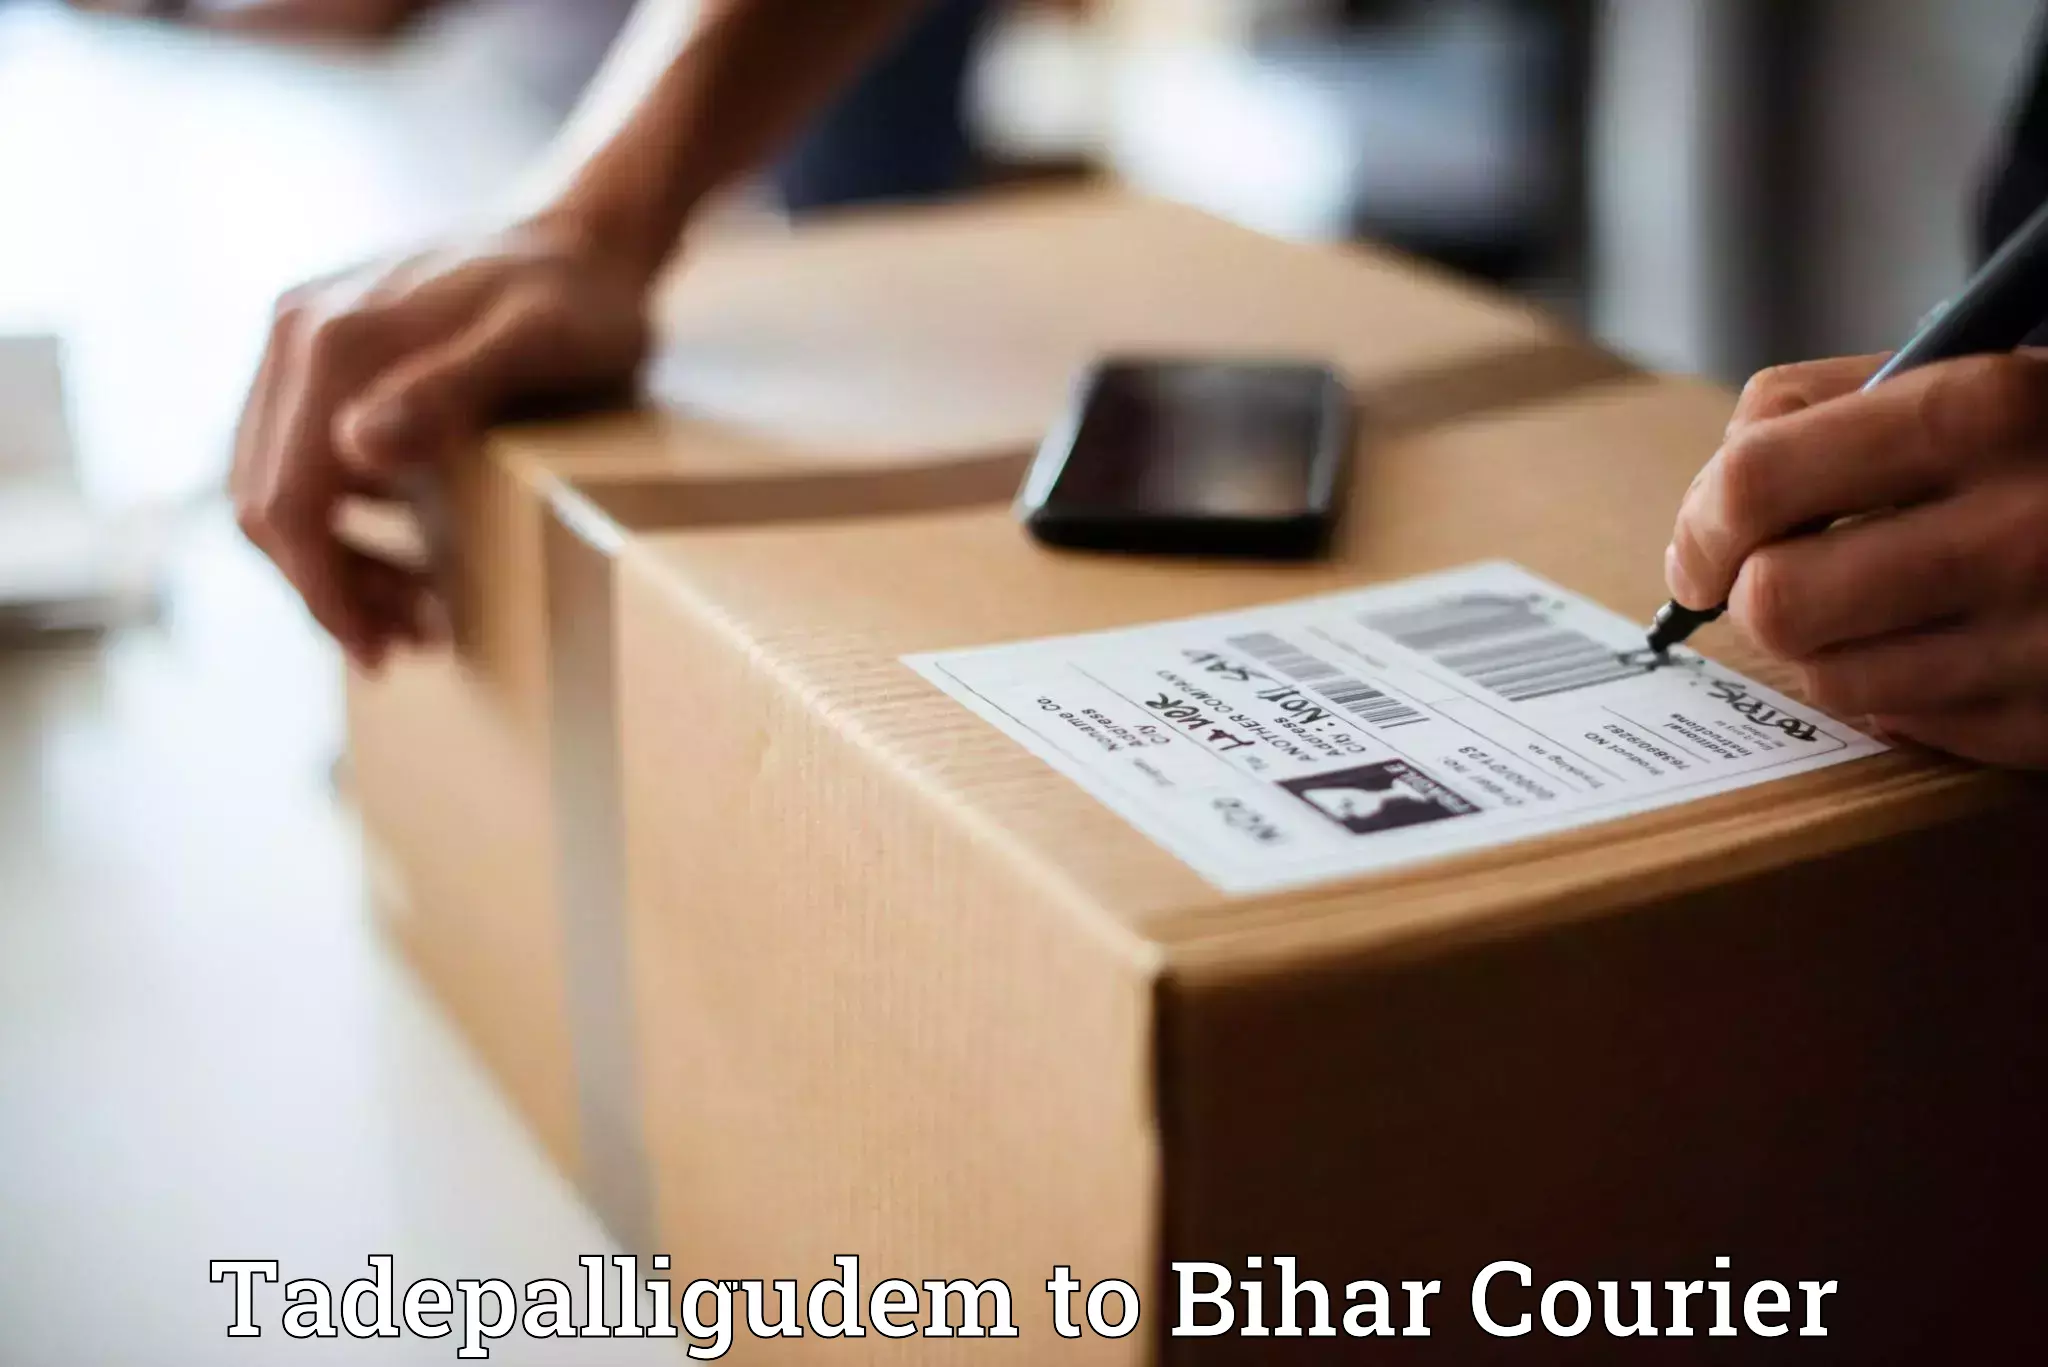 Large package courier Tadepalligudem to Biraul